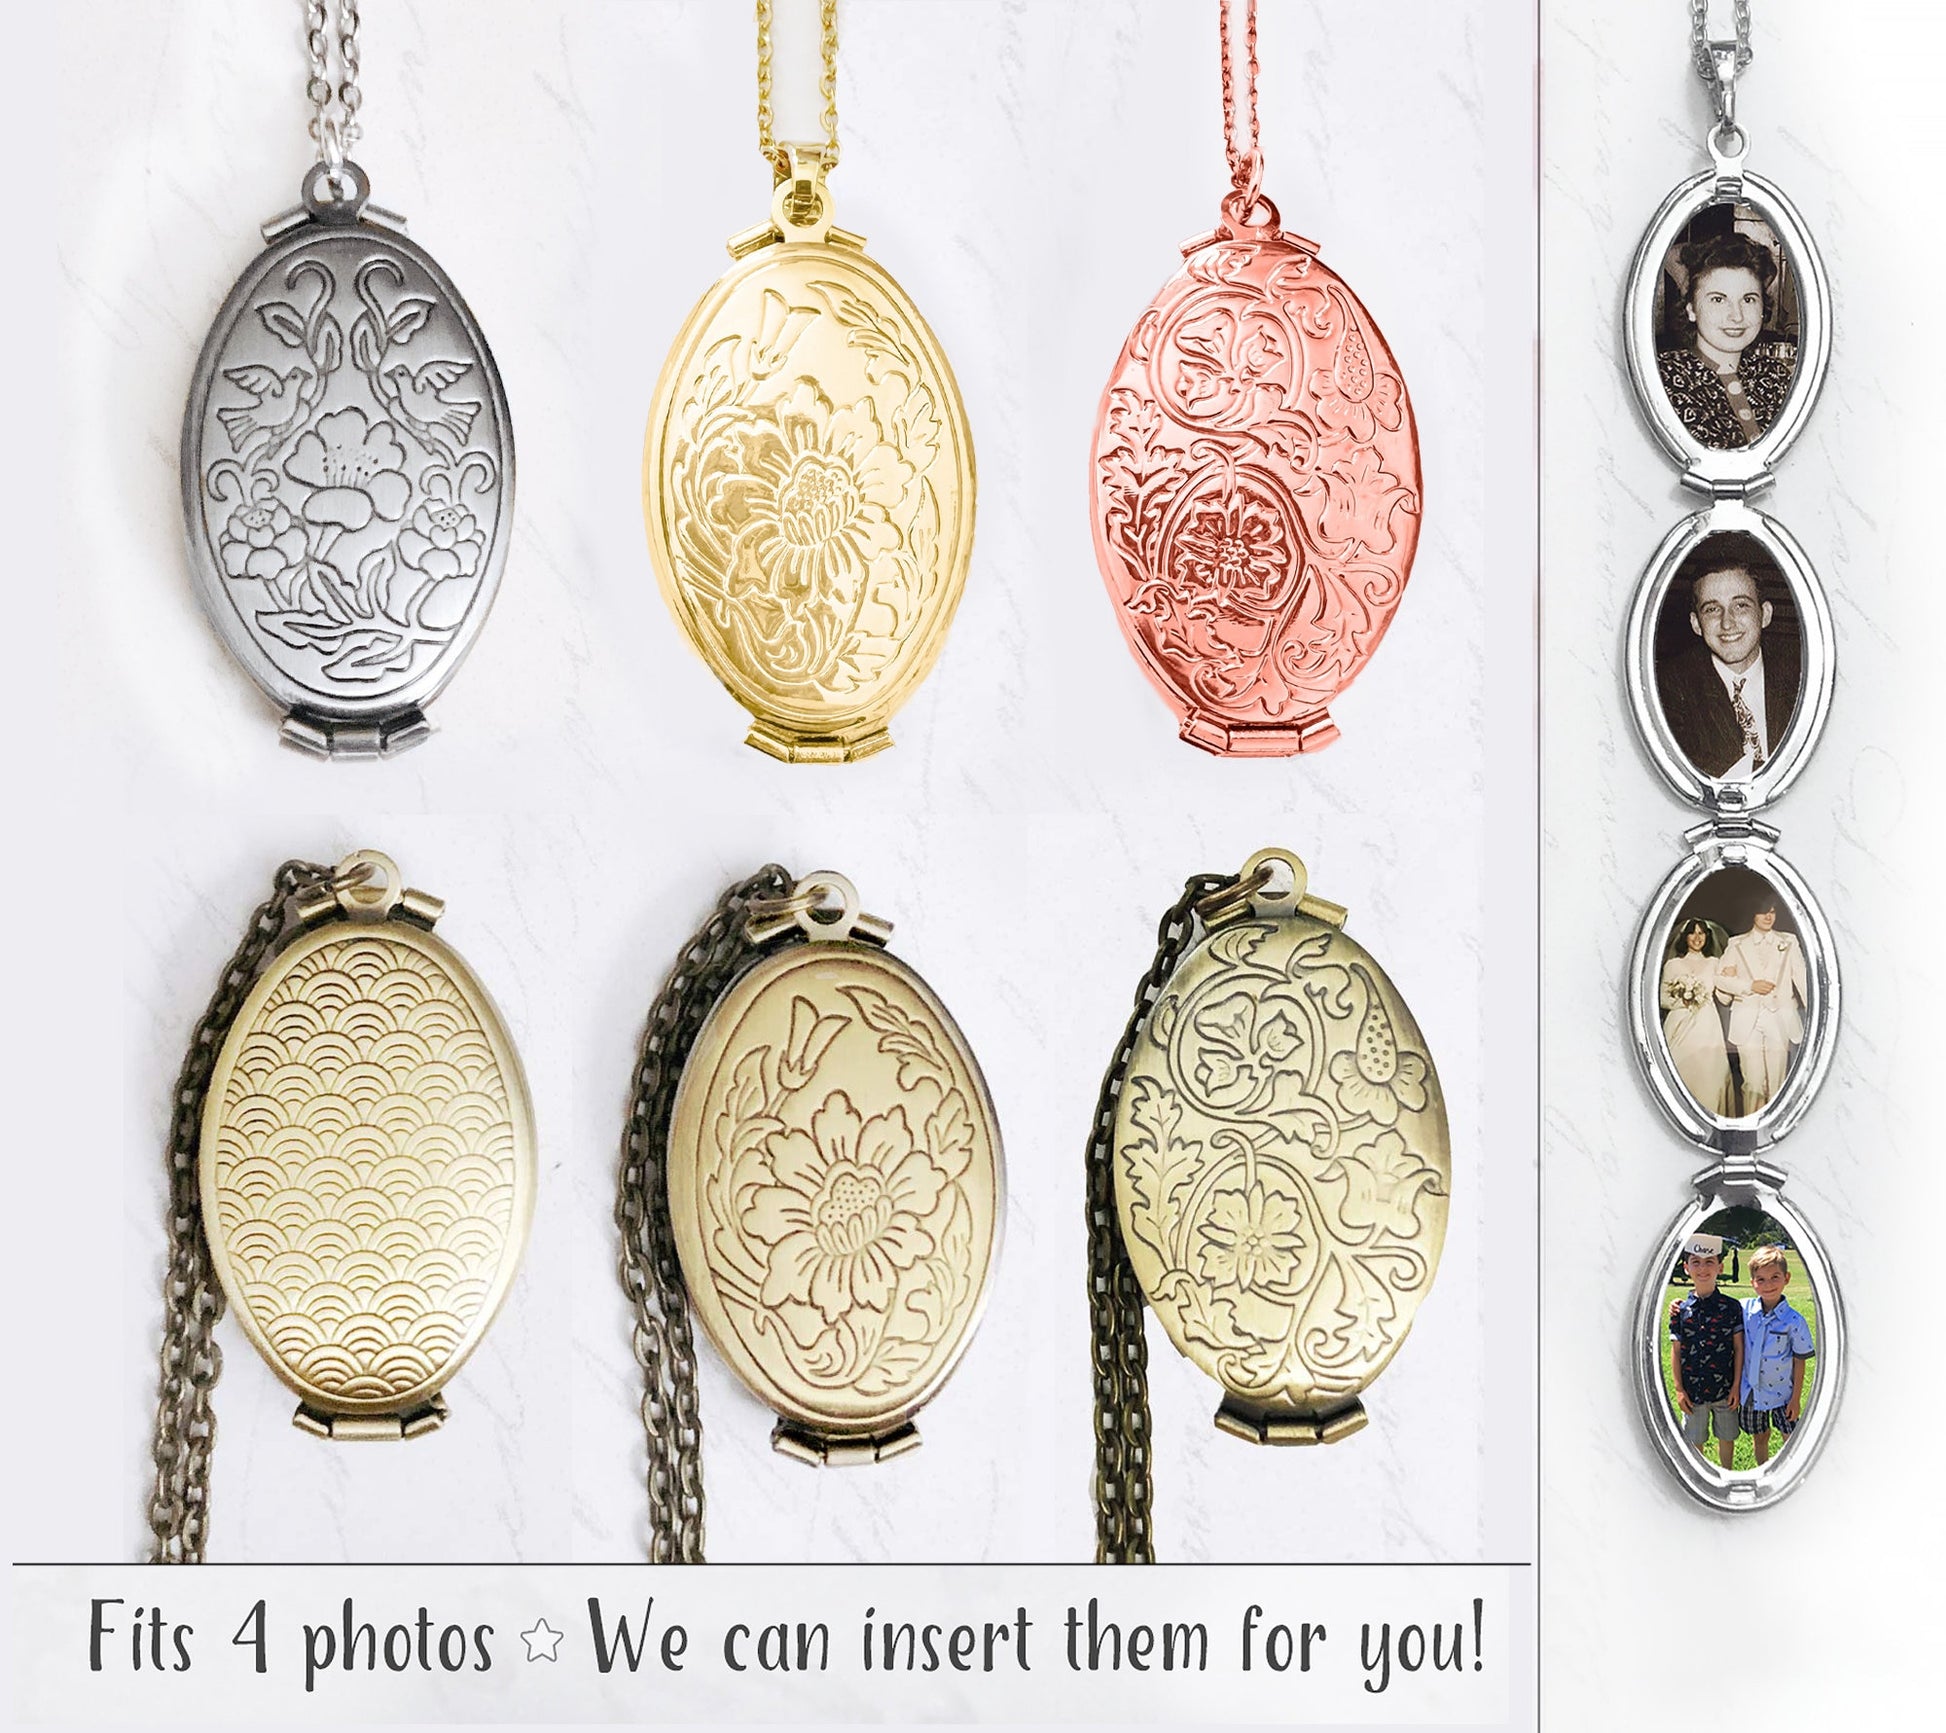 Locket With 4 Photos / 4 Pictures in Locket / Custom Photo Locket / Gift for Mom / Mother's Day Gift / Picture Locket / 4 Photo Locket